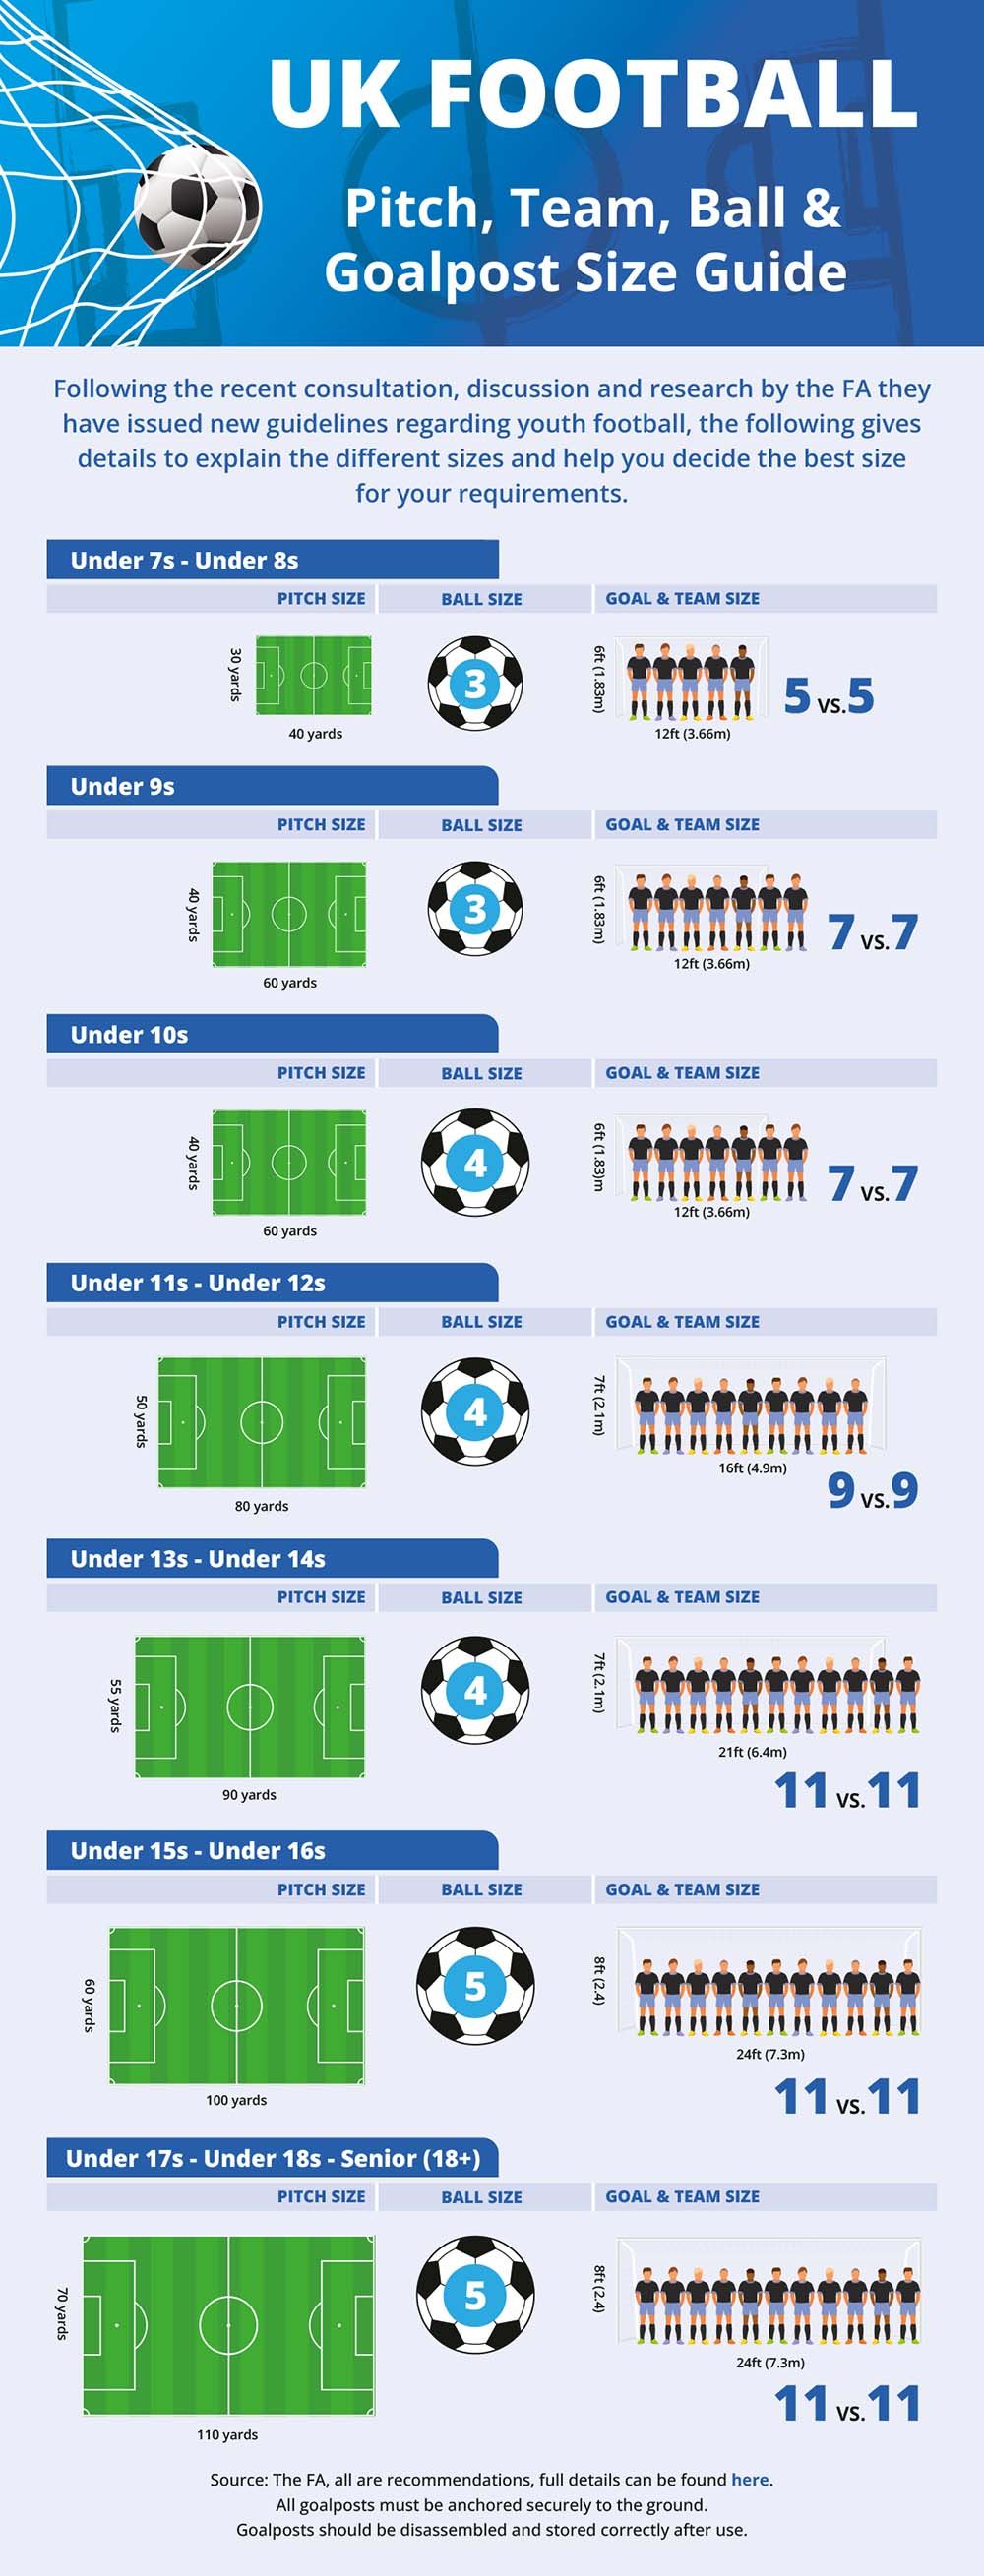 Football Pitch & Goalpost Sizing Guide